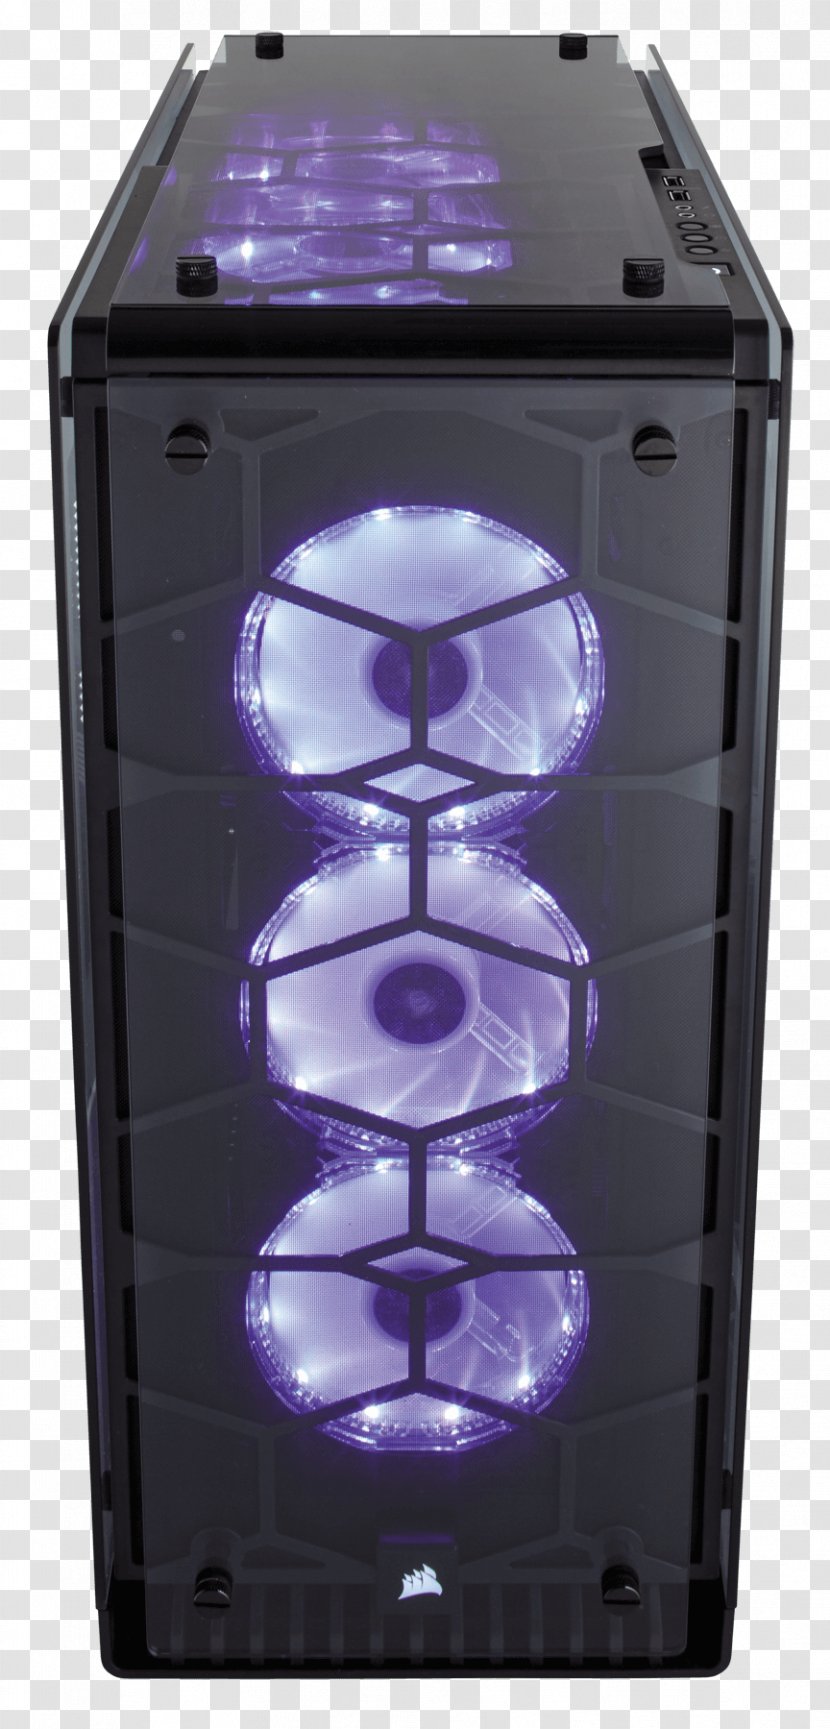 Computer Cases & Housings ATX Corsair Components Gaming Hardware - Cooling Tower Transparent PNG